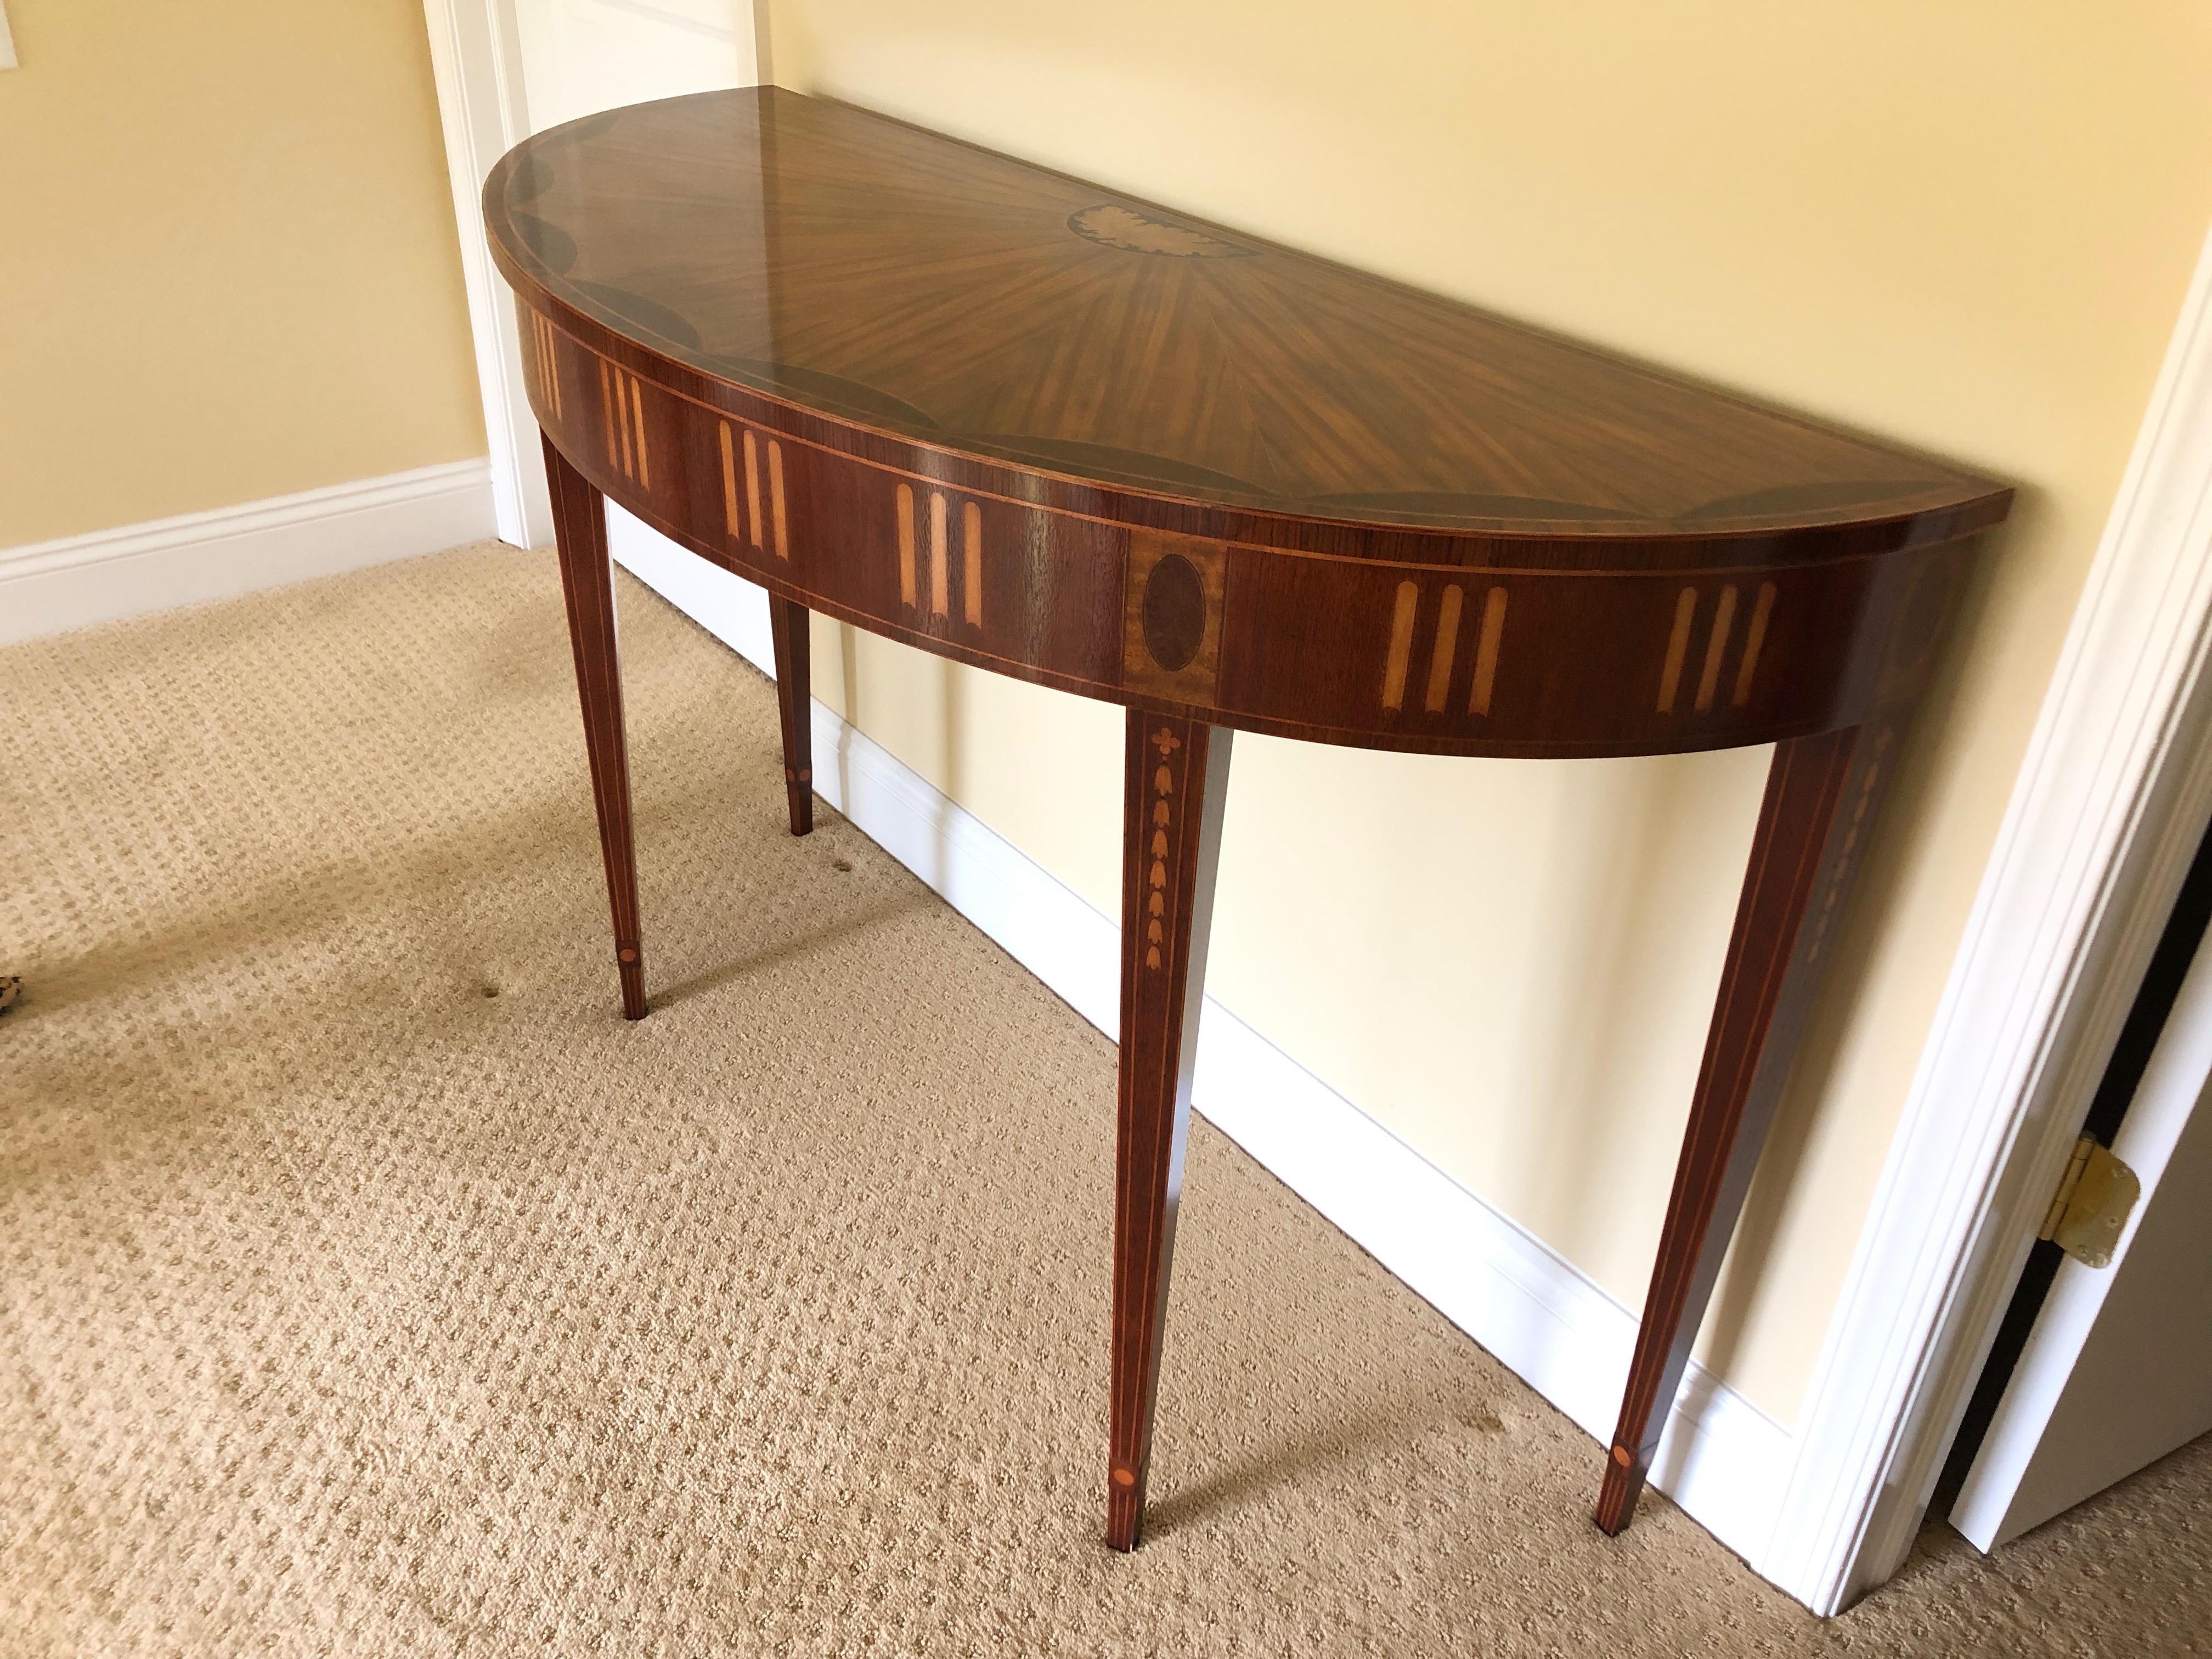 Gorgeous demilune having incredible inlaid details with a mix of woods including mahogany, satinwood and ebony, having lovely acorn decoration at the top back with amazing grain on top that fans outward. The legs are elegantly tapered and also